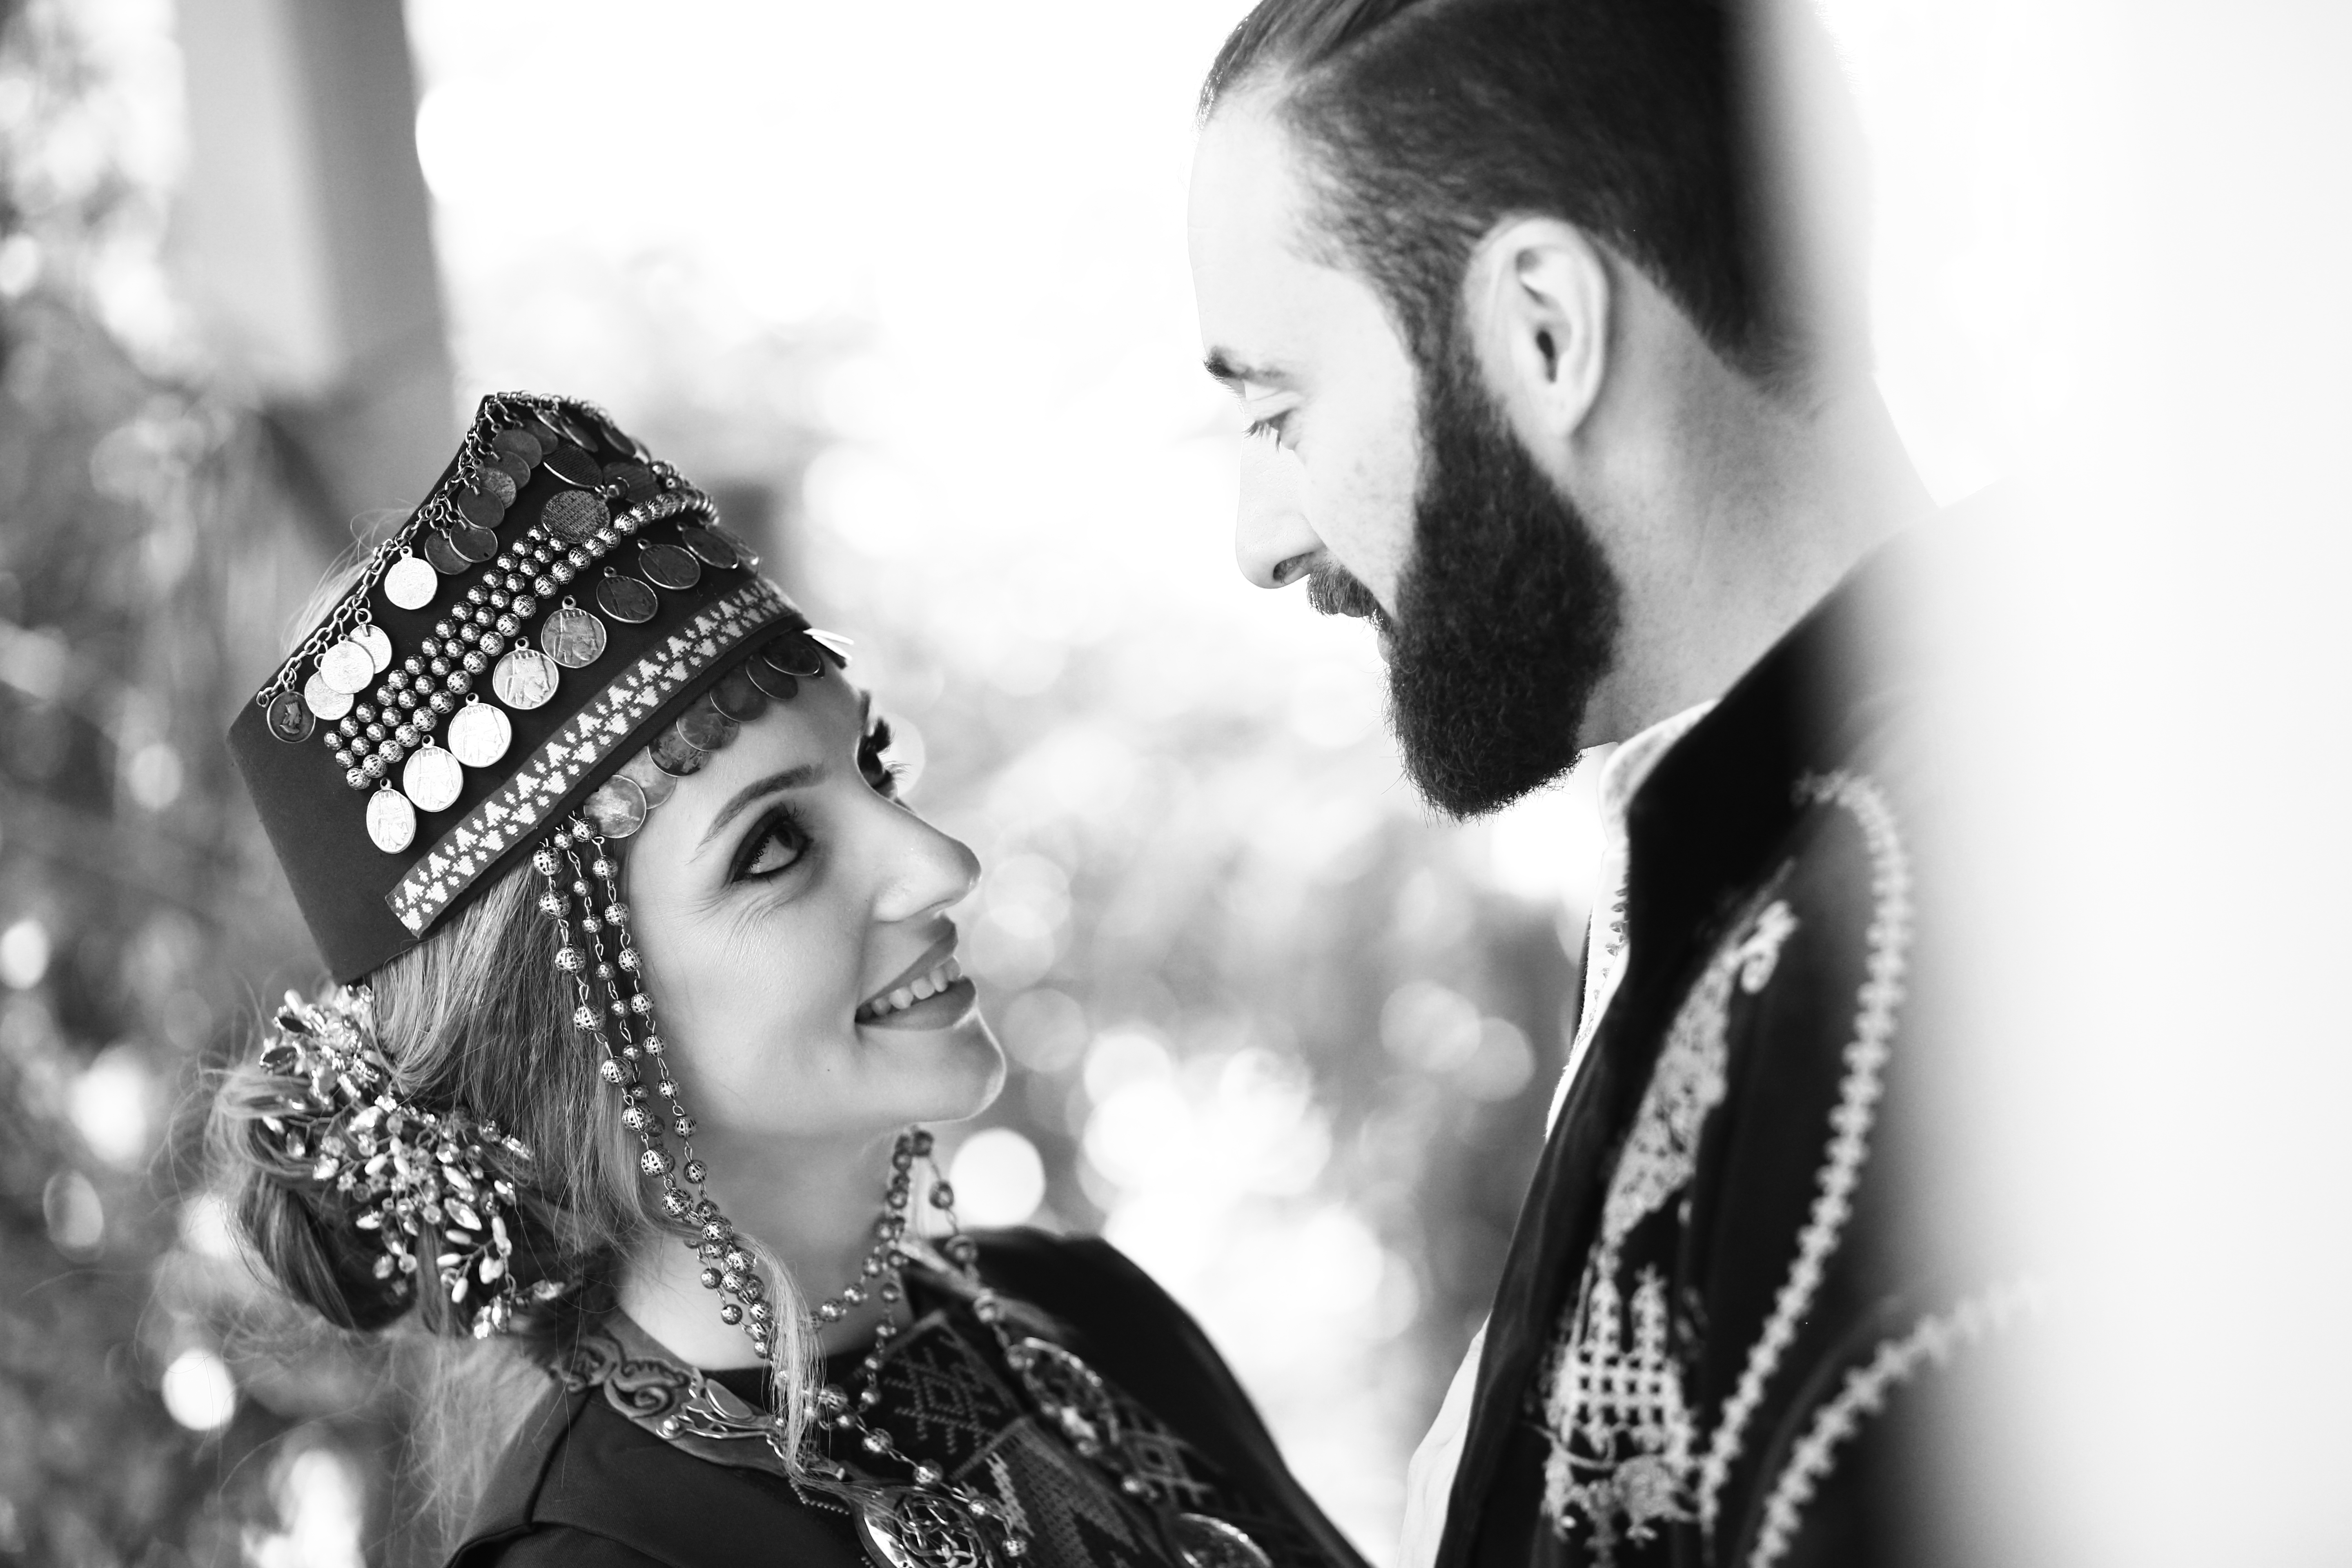 What are armenian wedding traditions?